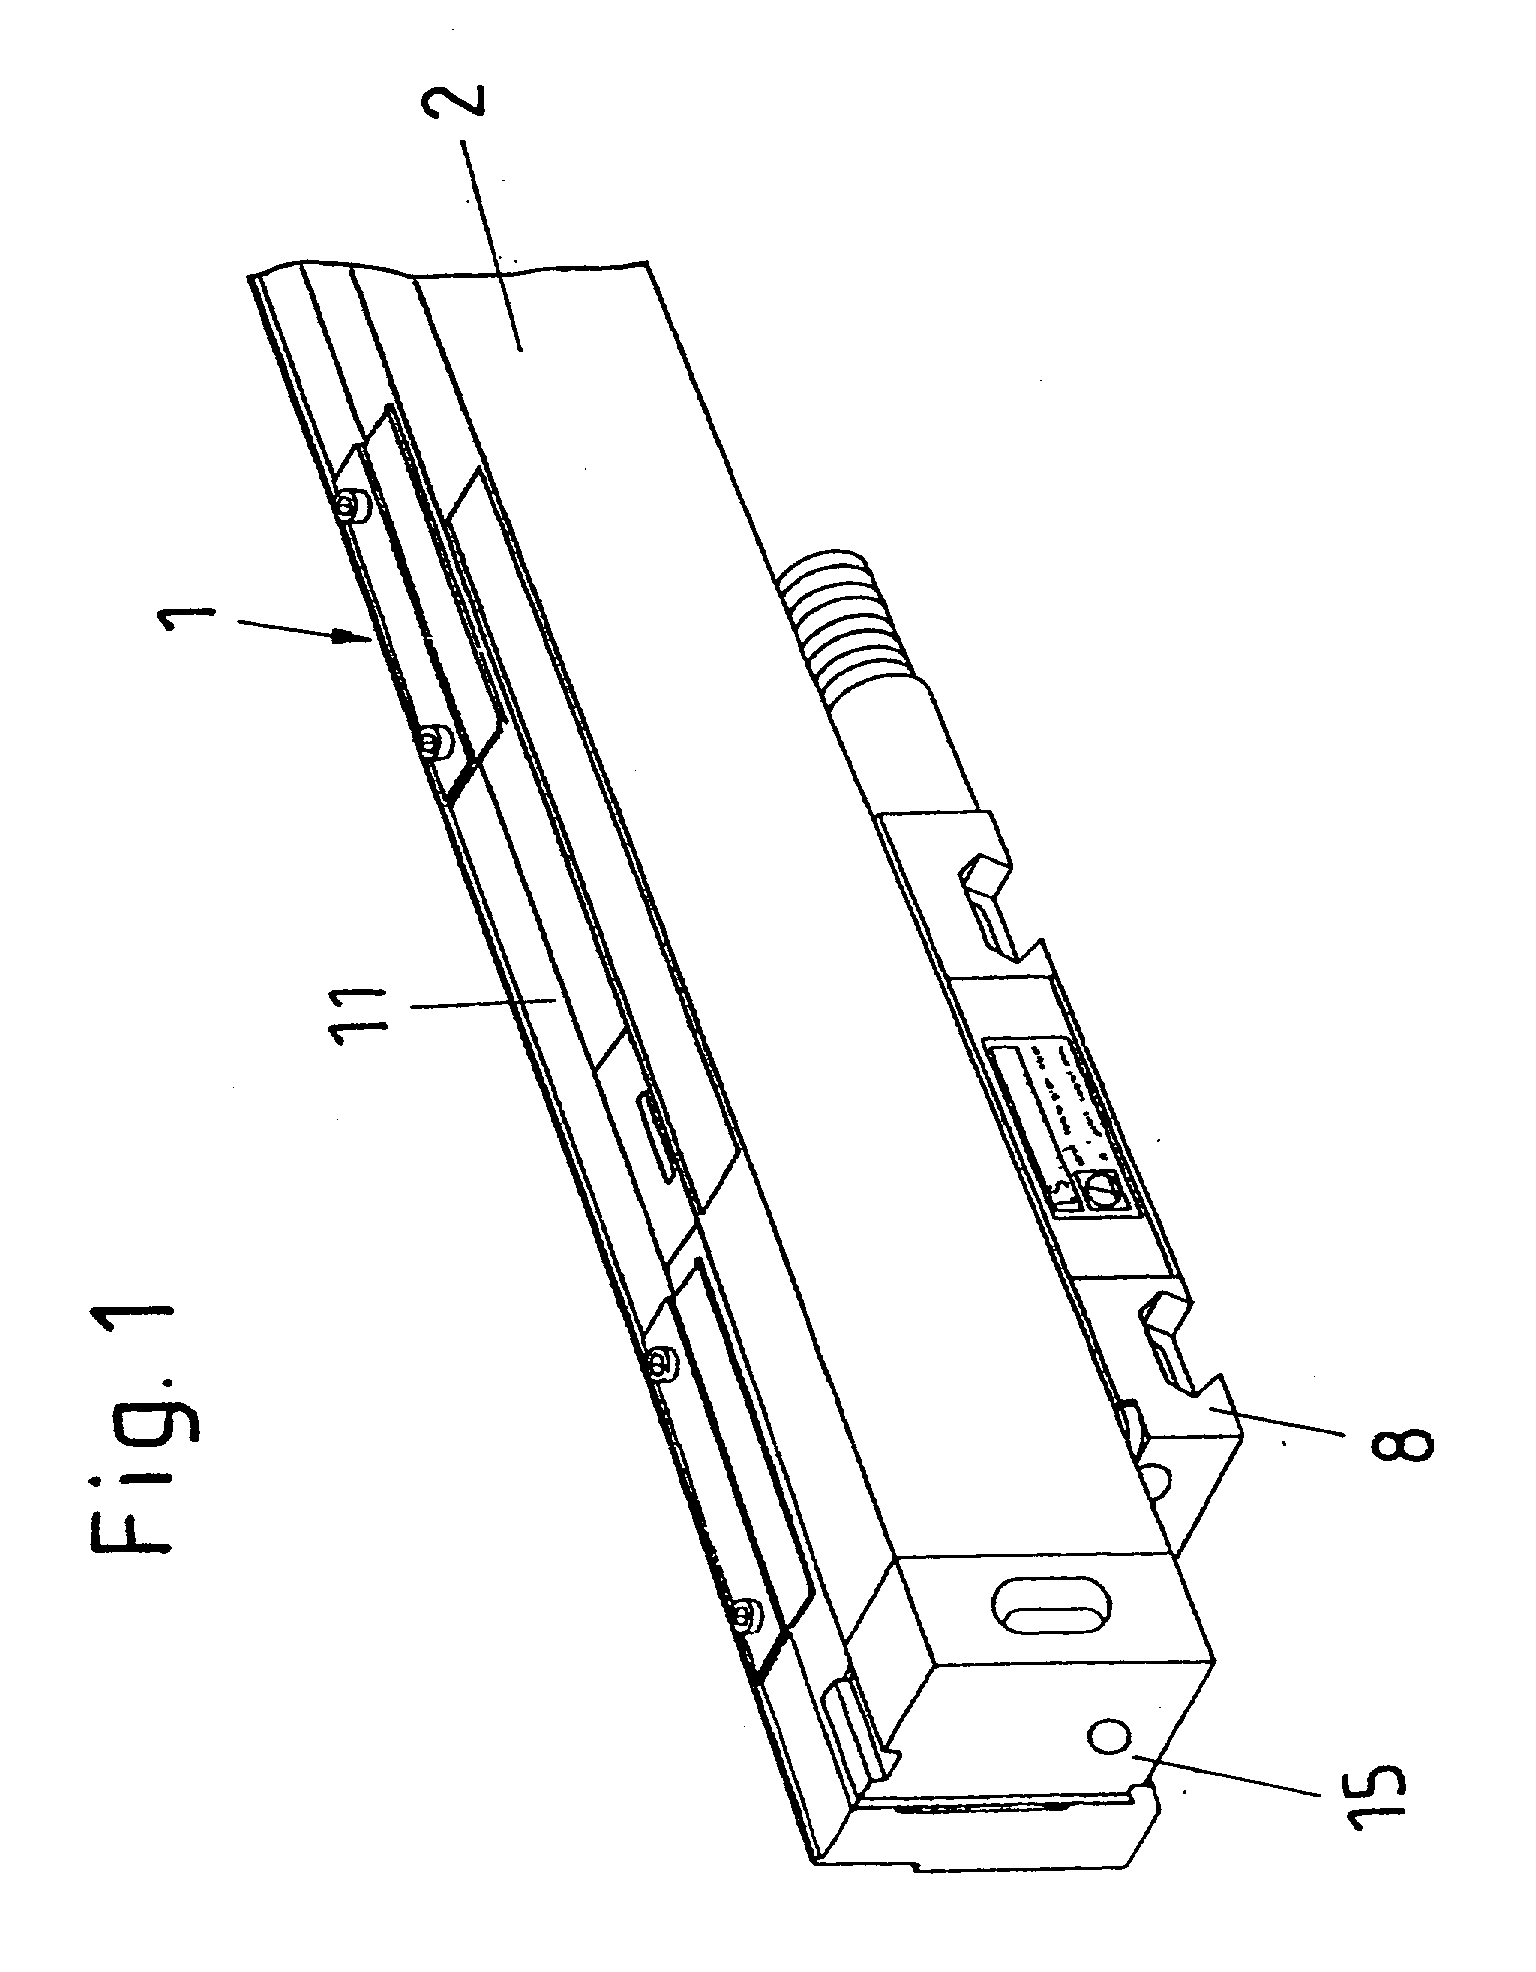 Cover for a sealed linear encoder and a sealed linear encoder